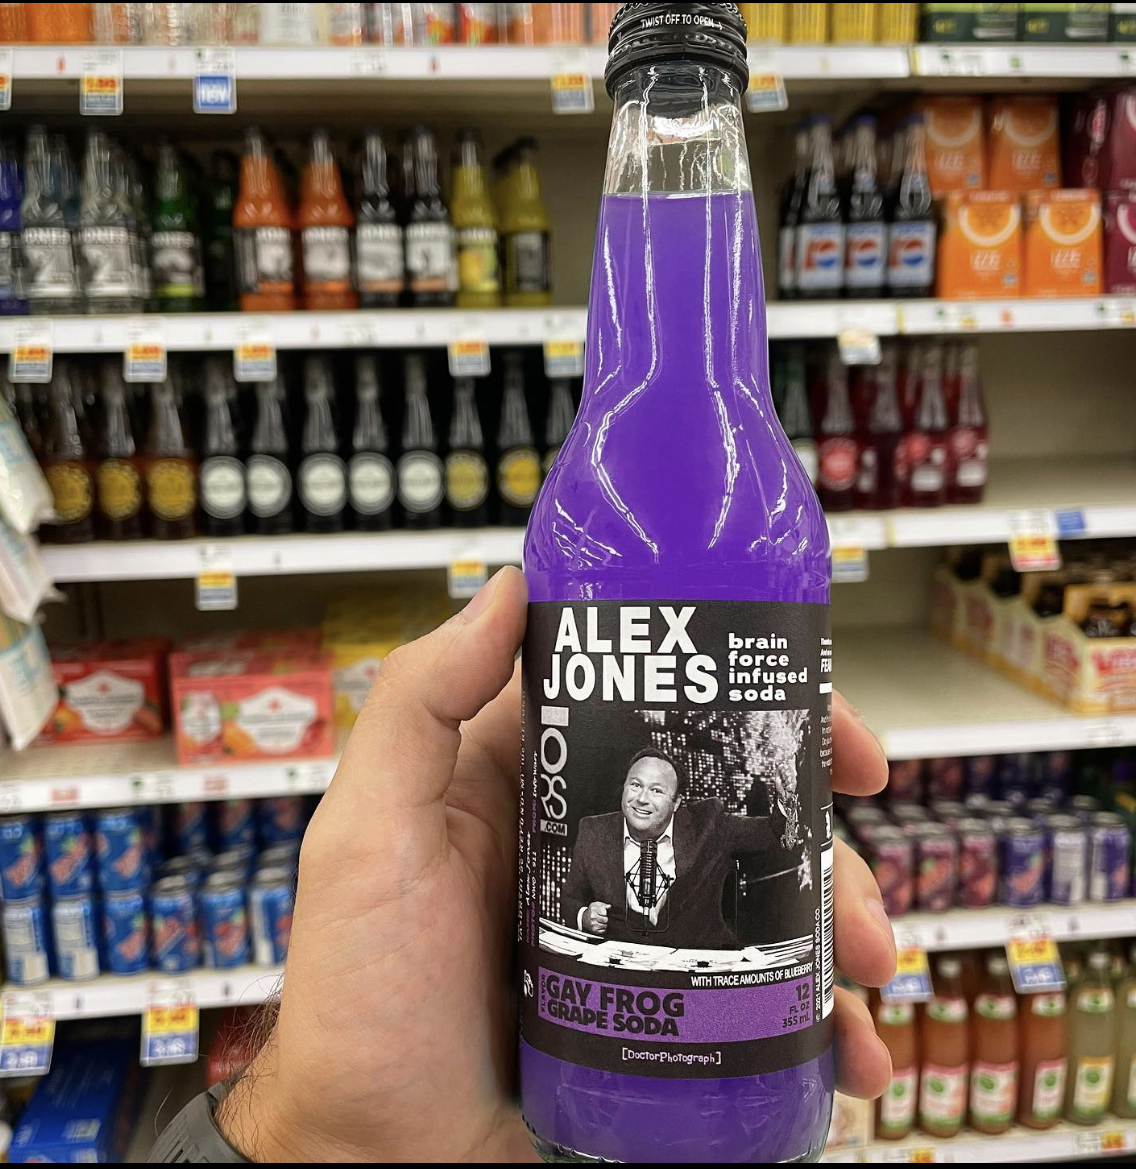 doctor photograph memes - drink - Tov 19 Twist Off To Open log Alex Jones As Gay Frog Grape Soda Pr DoctorPhotograph brain force infused soda With Trace Amounts Of Blueberry 12 Floz 355 ml Fen he Tea ba Aze The He C